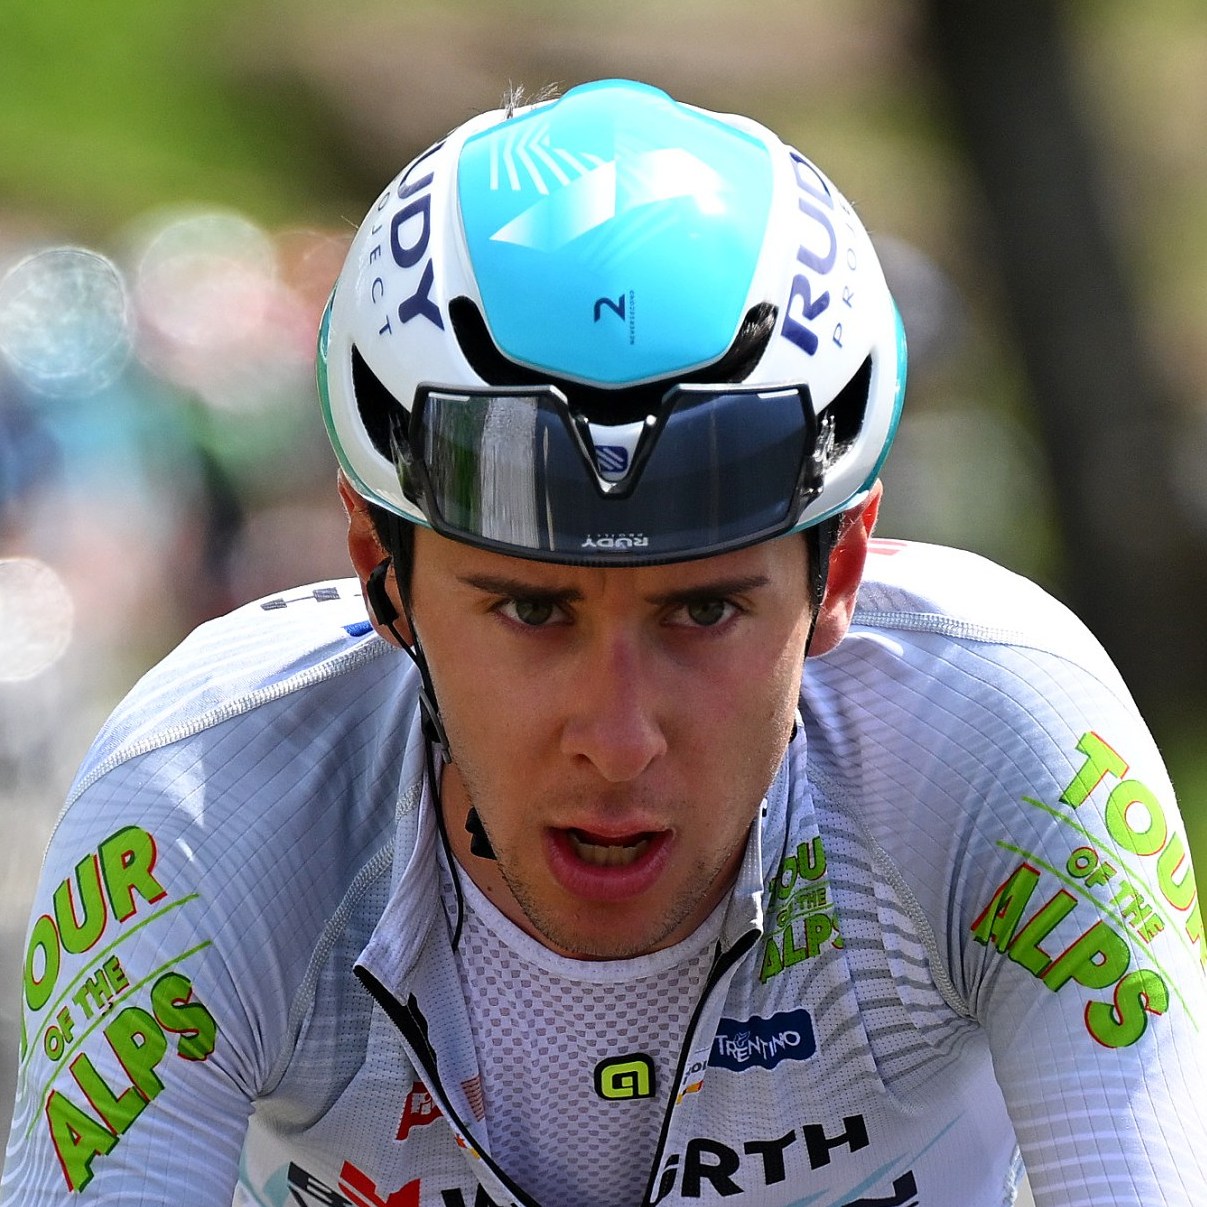 Tiberi came third in this year’s Tour of the Alps